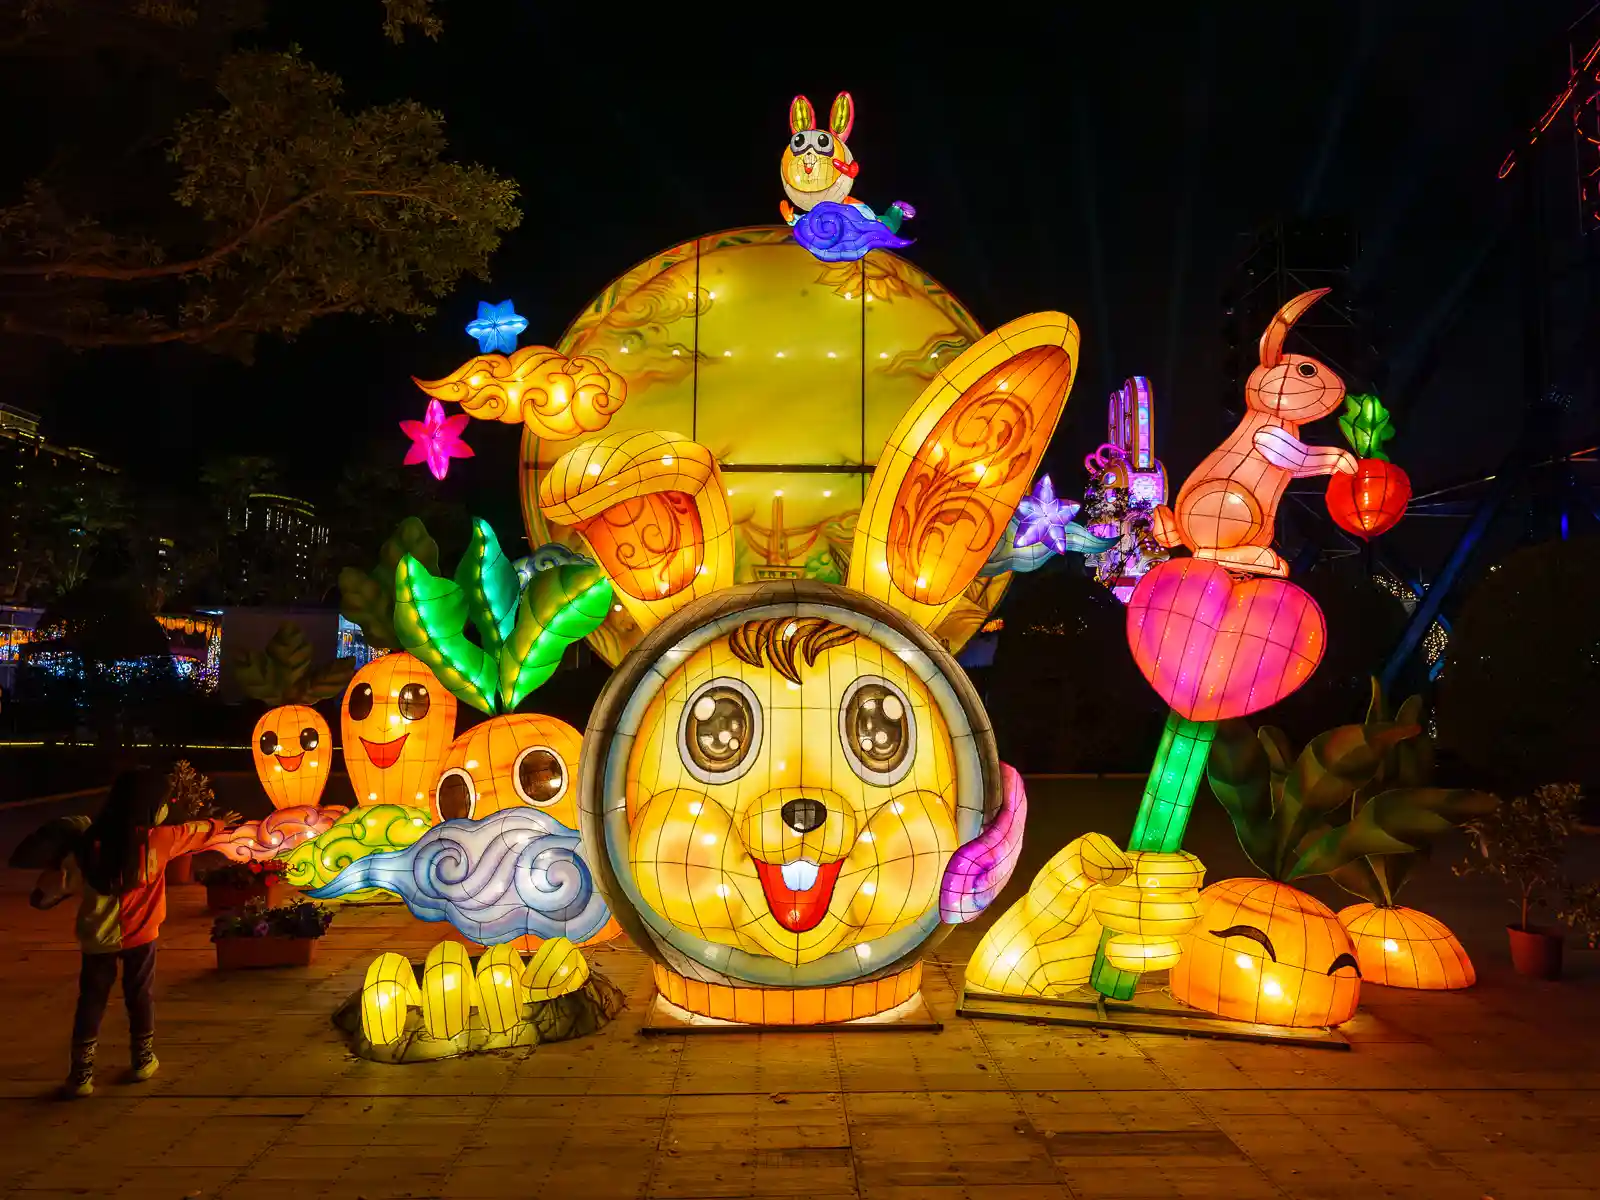 A large lantern display with an illuminated bunny, carrots, and other lanterns.